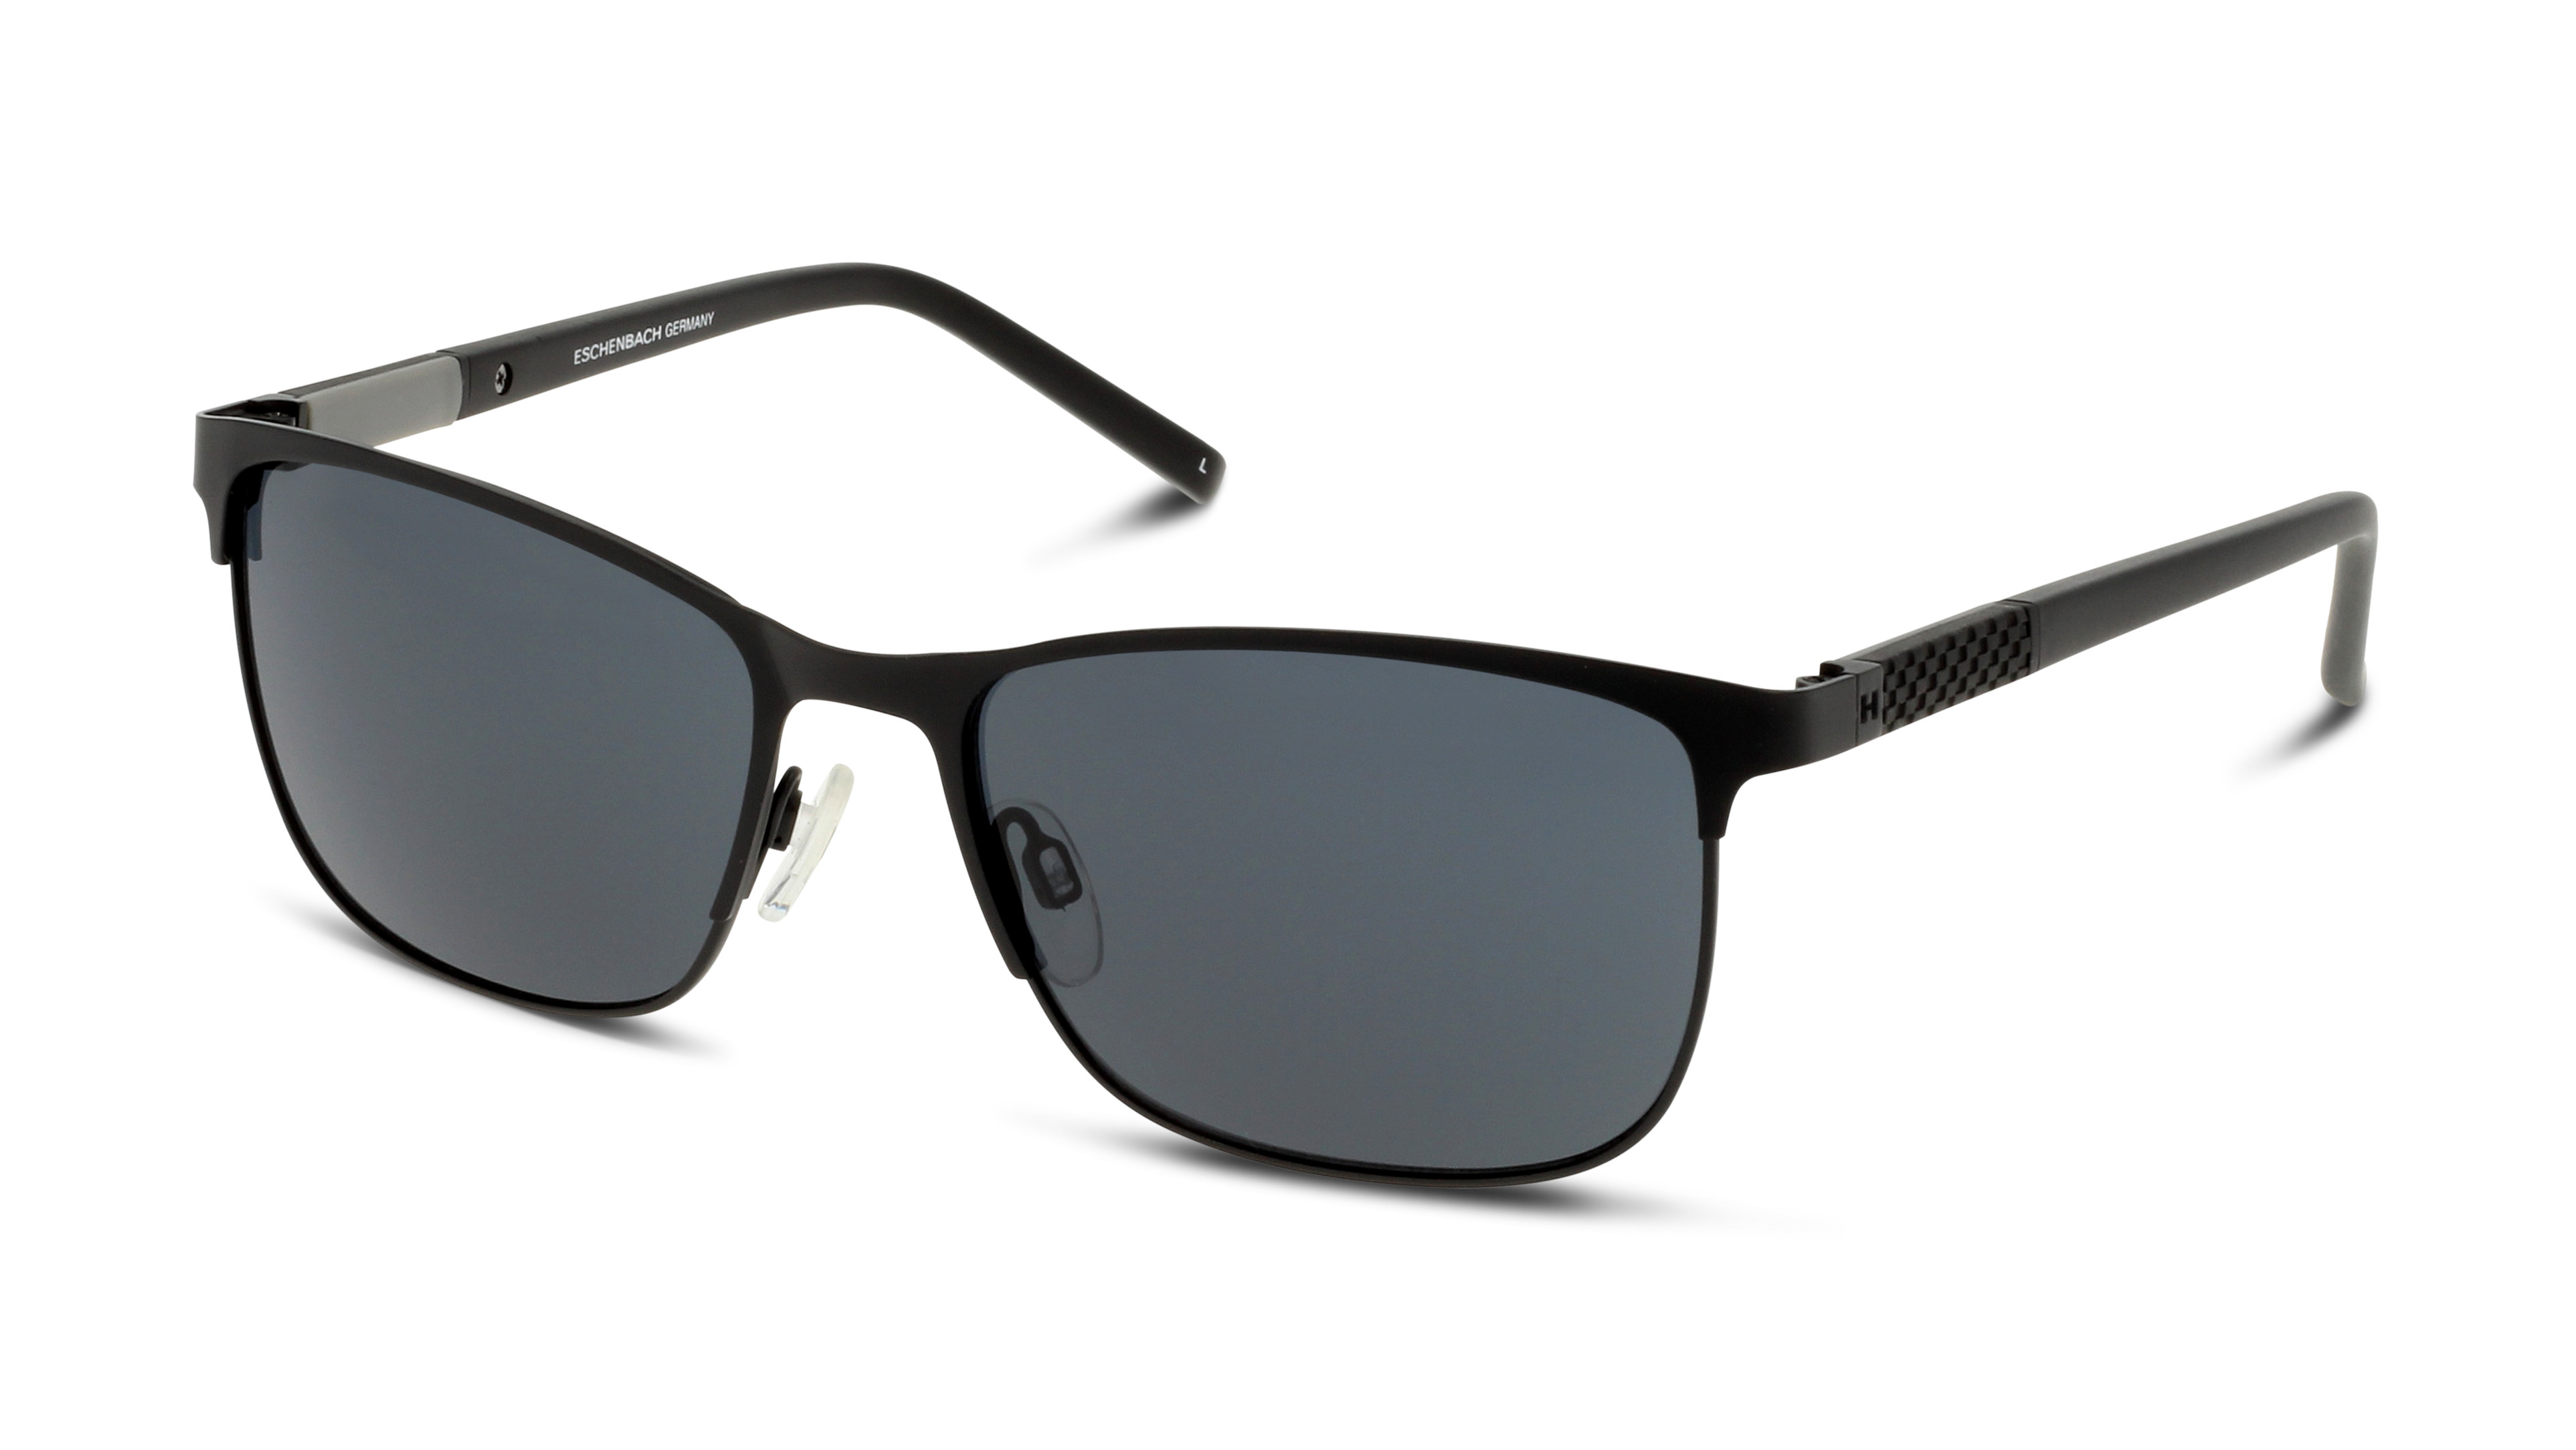 [products.image.angle_left01] HUMPHREY´S eyewear 585227 101030 Sonnenbrille